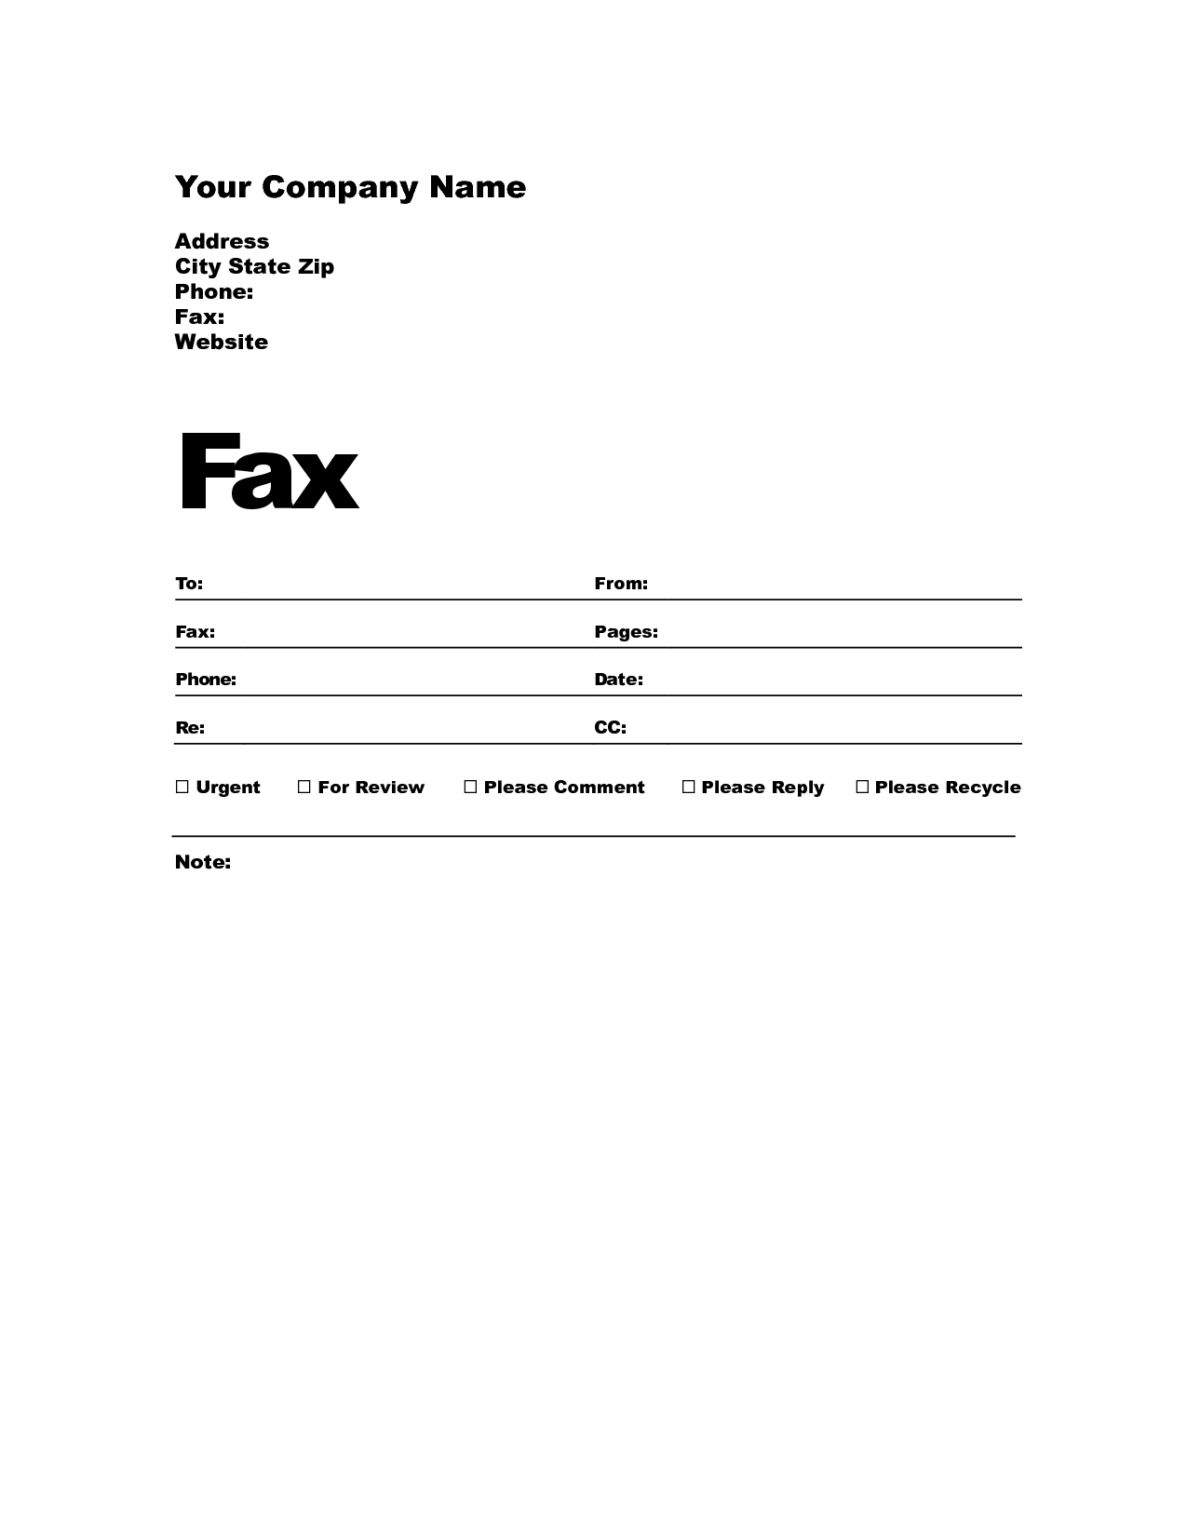 Free Blank Fax Cover Sheet Template | Fax Cover Sheet Template